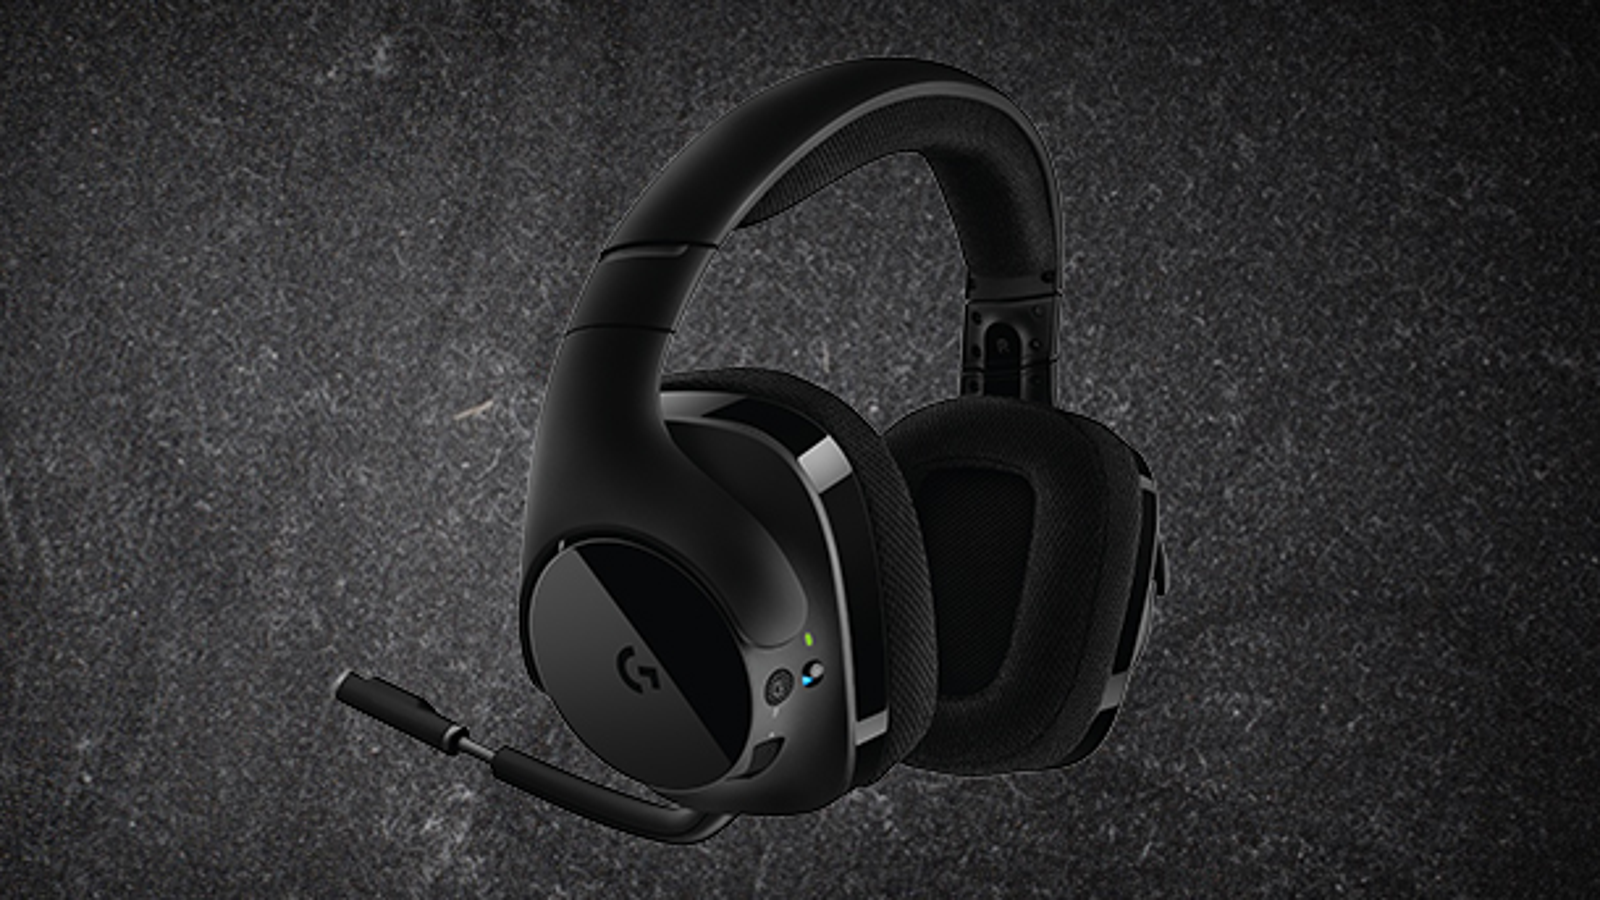 Rouse talentfulde Bliv ved Logitech G533 Headset Review: Elegant Simplicity in a Gaming Headset | VG247